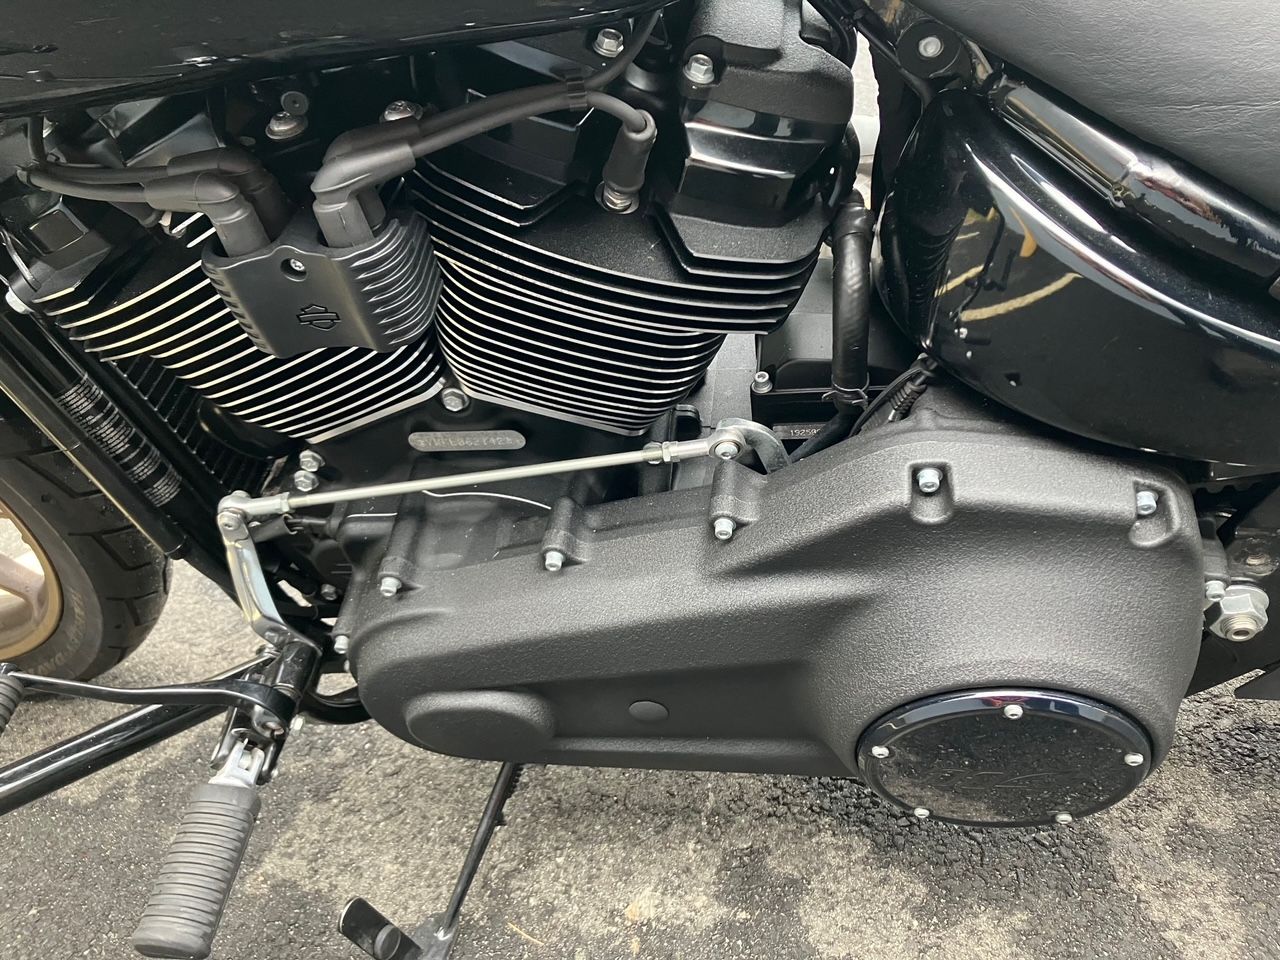 2020 Harley-Davidson LOW RIDER S in West Long Branch, New Jersey - Photo 11